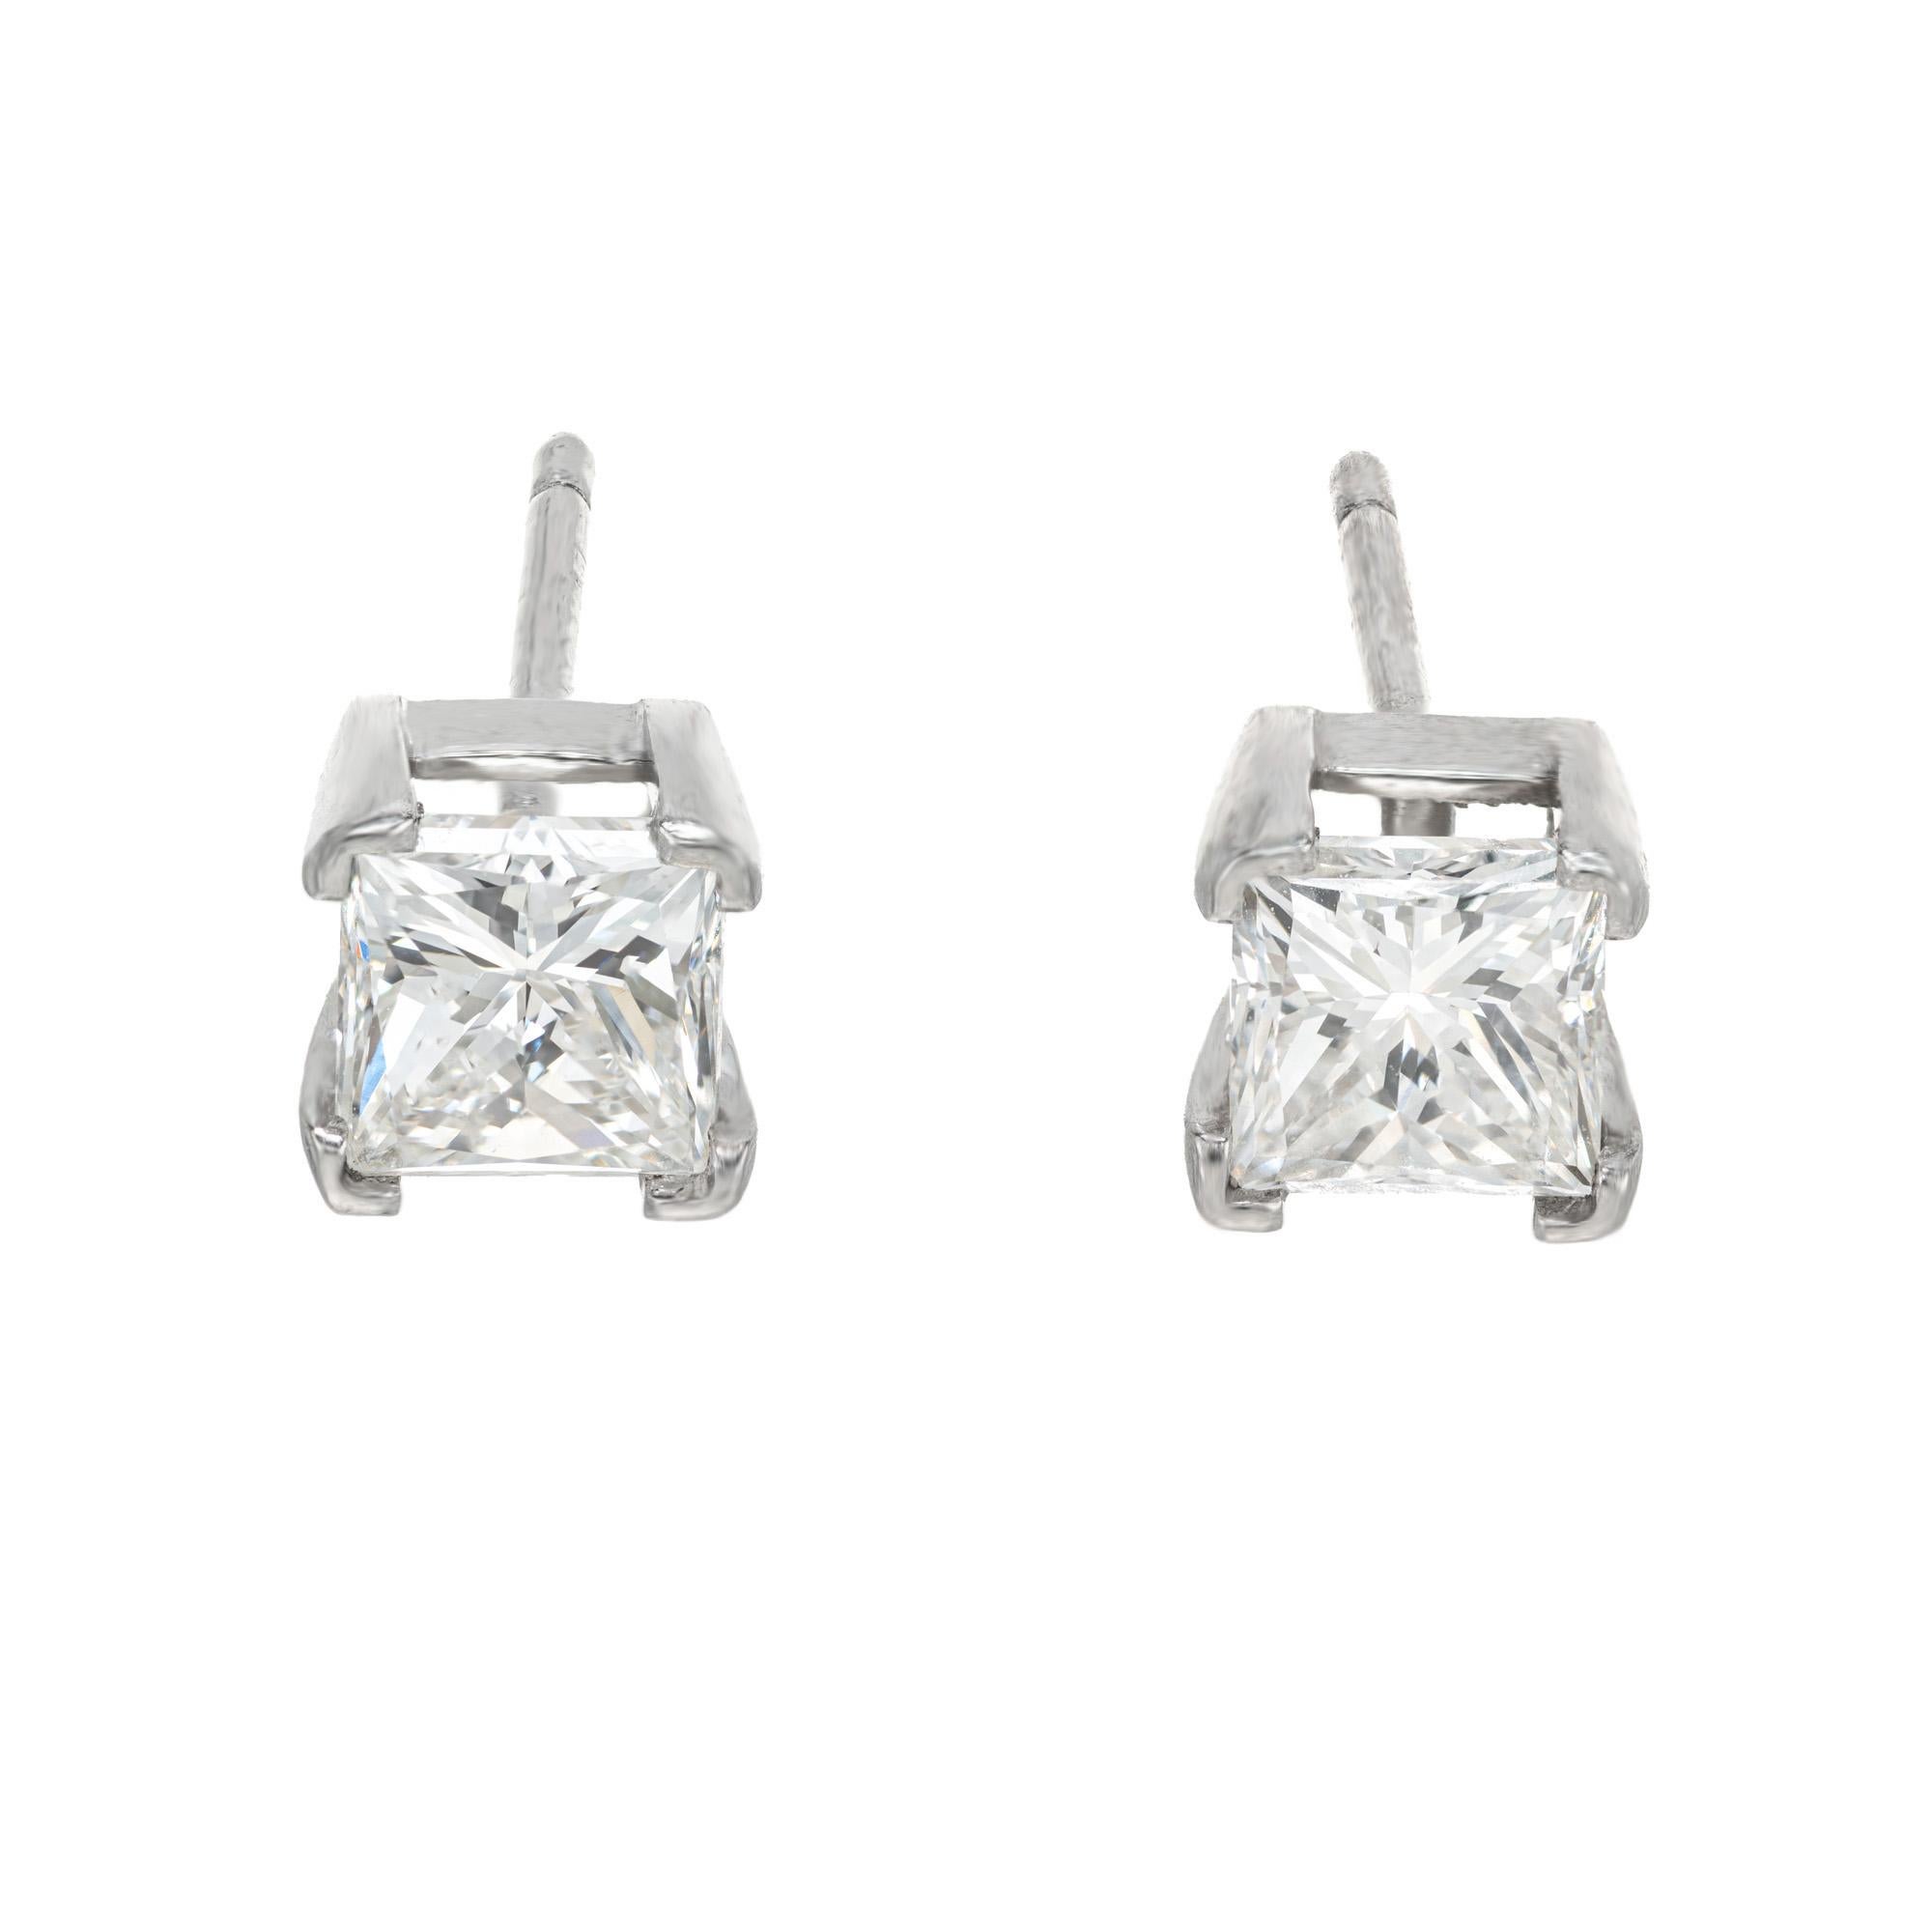 Diamond stud earrings. 2 princess cut diamonds, together approximately 1.62cts. Both are set in 4 prong platinum settings. Both are near colorless with and F grading. 
Follow us on our 1stdibs storefront to view our weekly new additions and 5 Star